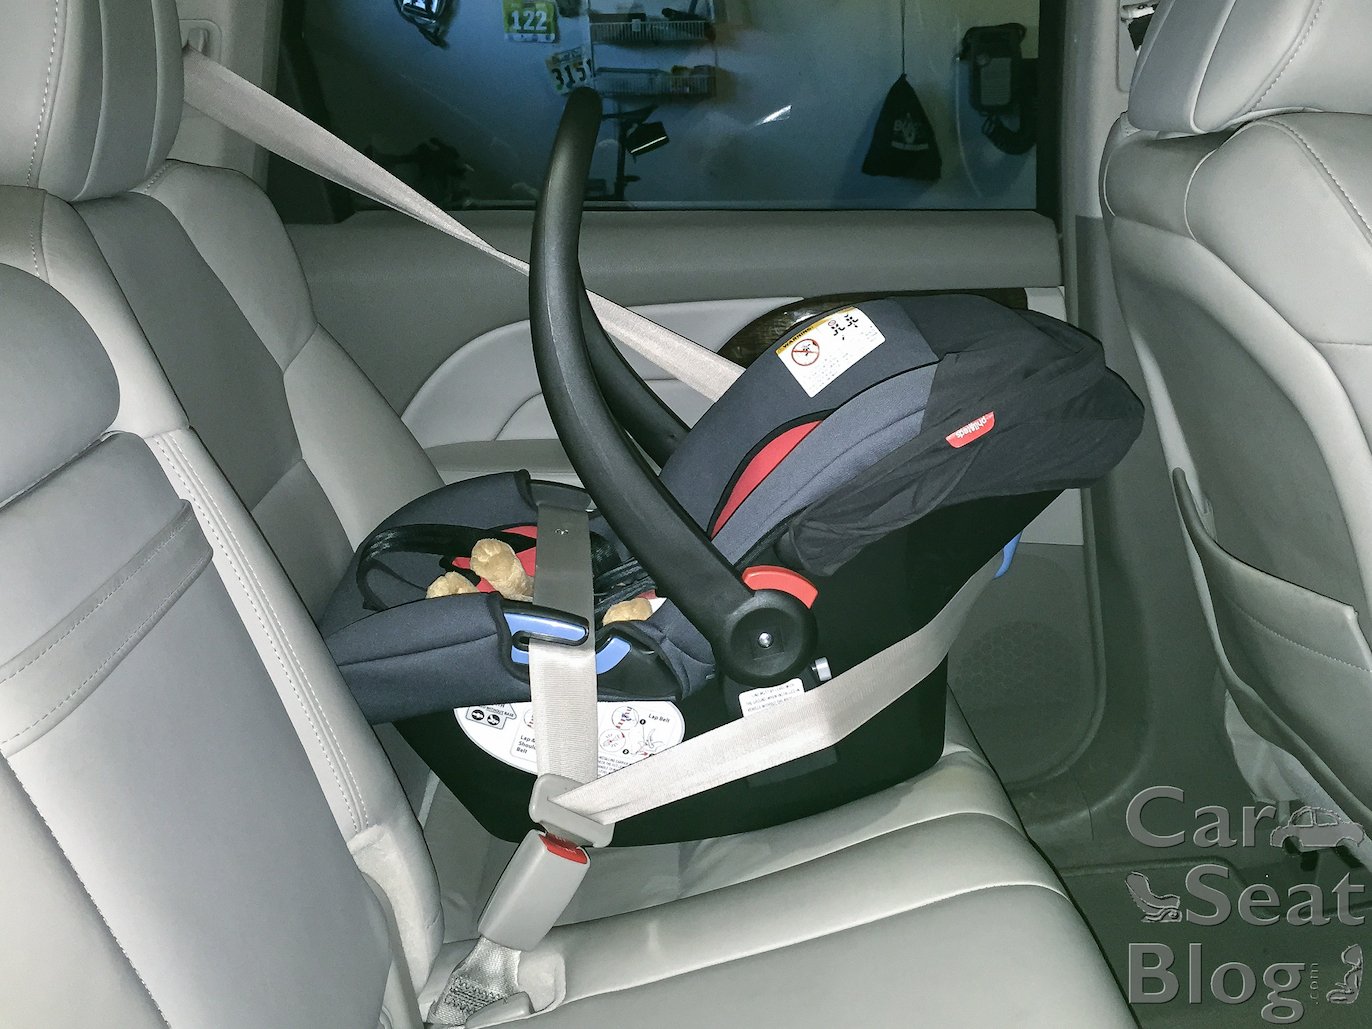 Purchase Install Graco Car Seat Without Base Up To 64 Off - How To Install Graco Infant Car Seat With Seatbelt